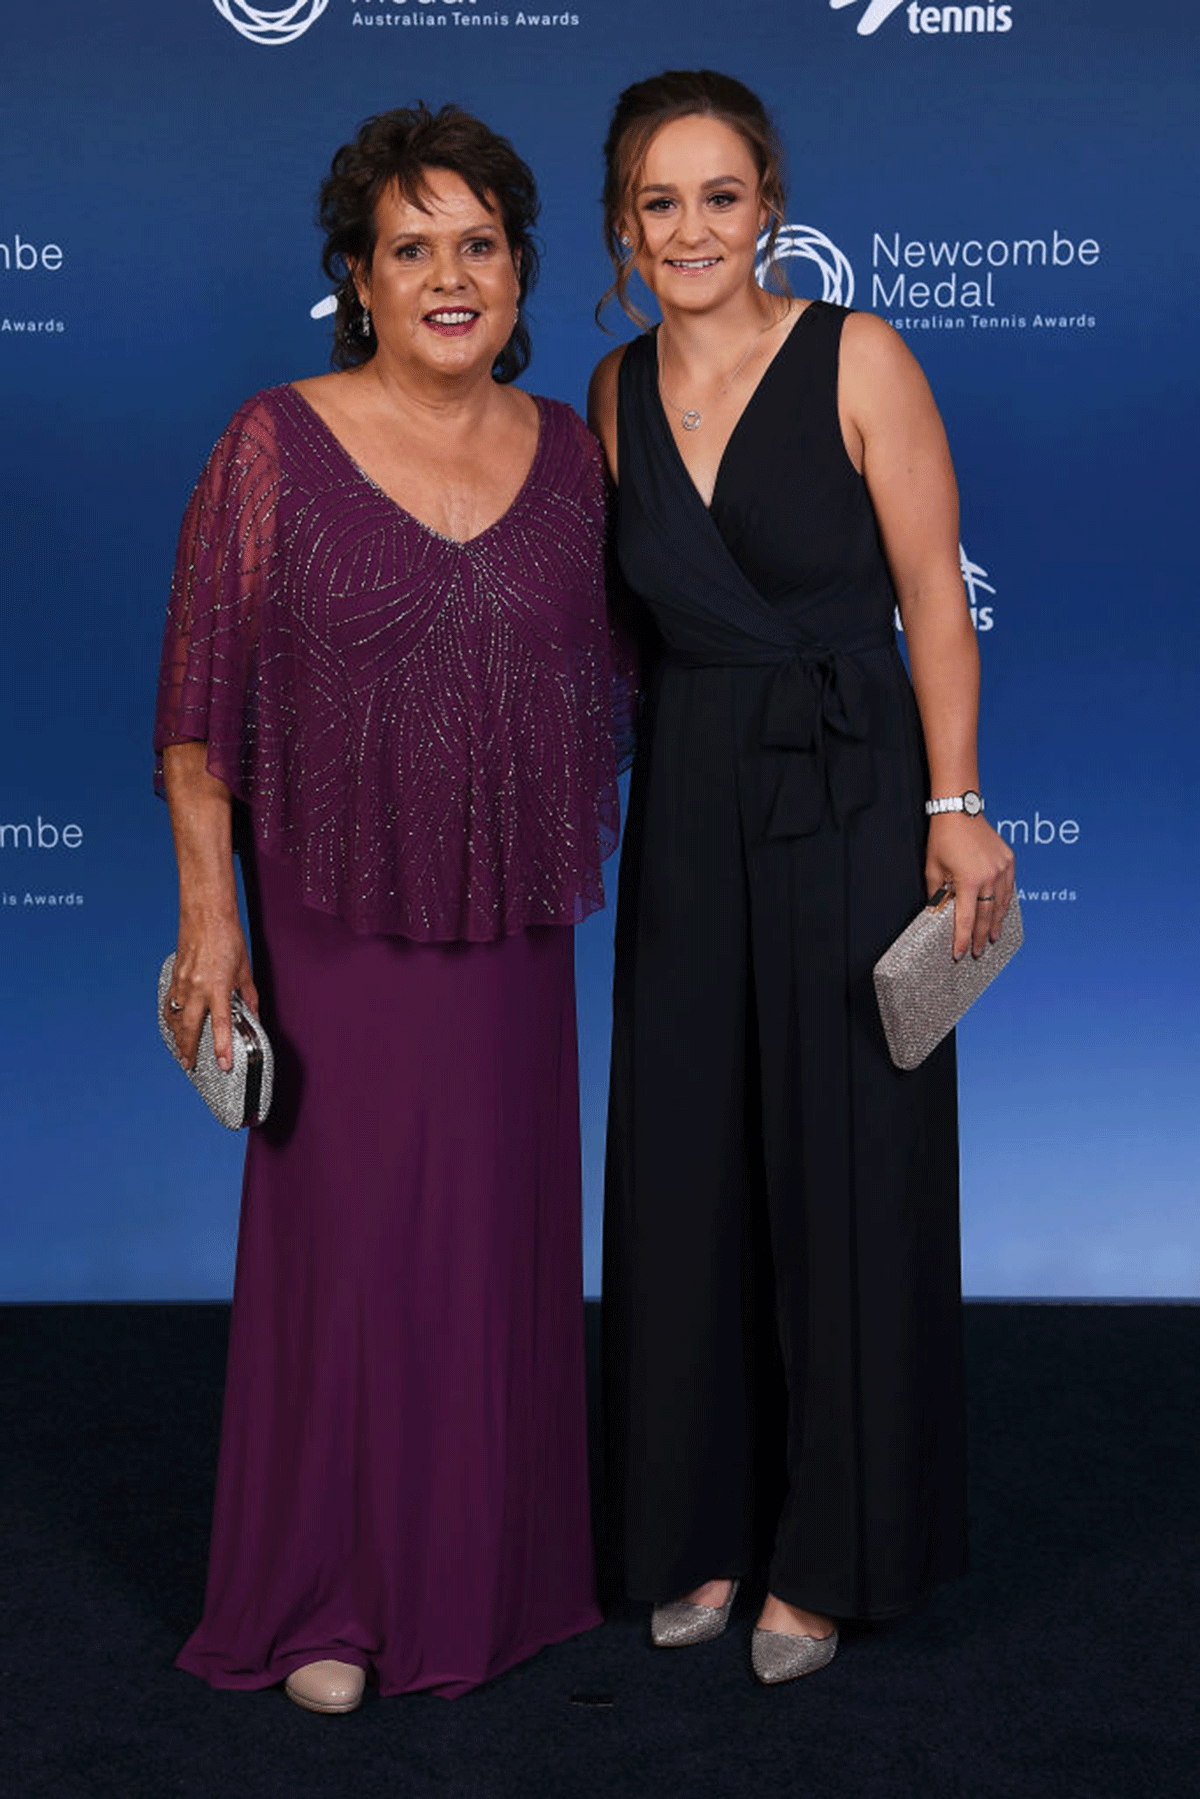 Ashleigh Barty (right) and Evonne Goolagong Cawley at the 2019 Newcombe Medal at Crown Palladium on December 02, 2019. Wearing a scalloped-edged outfit in the style of Goolagong's 1970s kit throughout the 2021 Wimbledon tournament, Barty said after her triumph that she hoped she had made her idol proud.